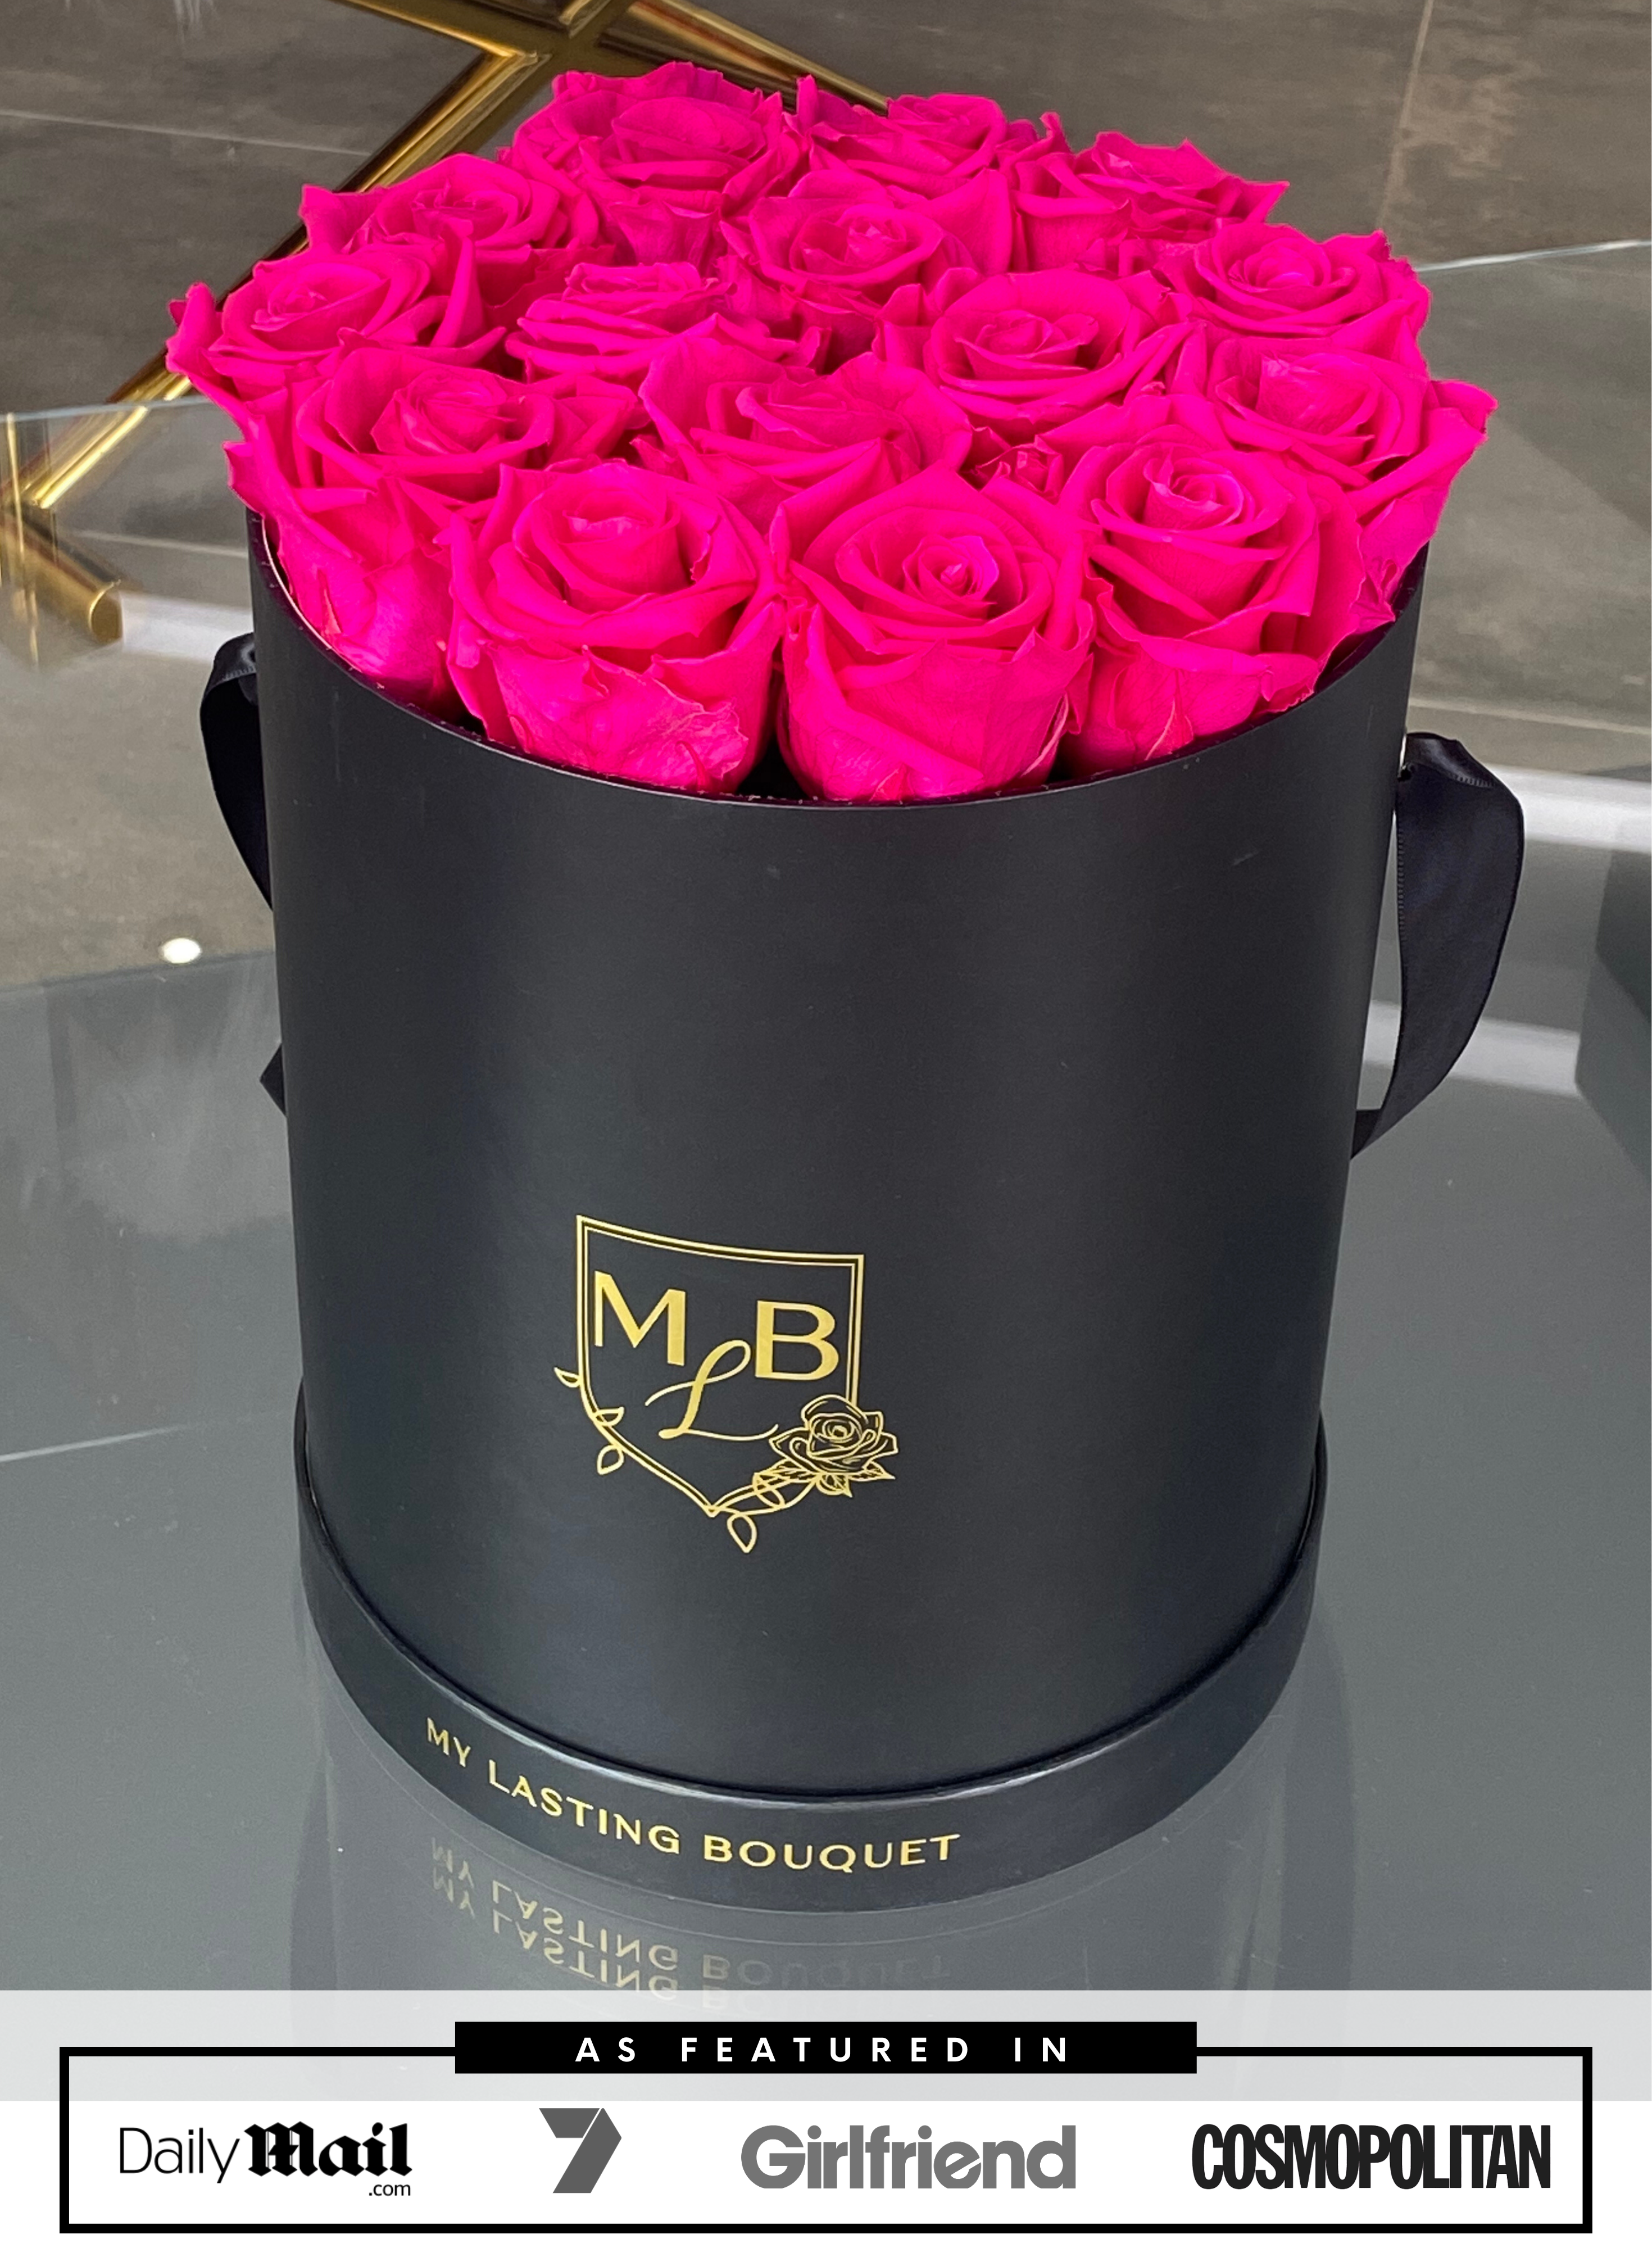 Round Rose Box- Hot Pink Roses - My Lasting Bouquet